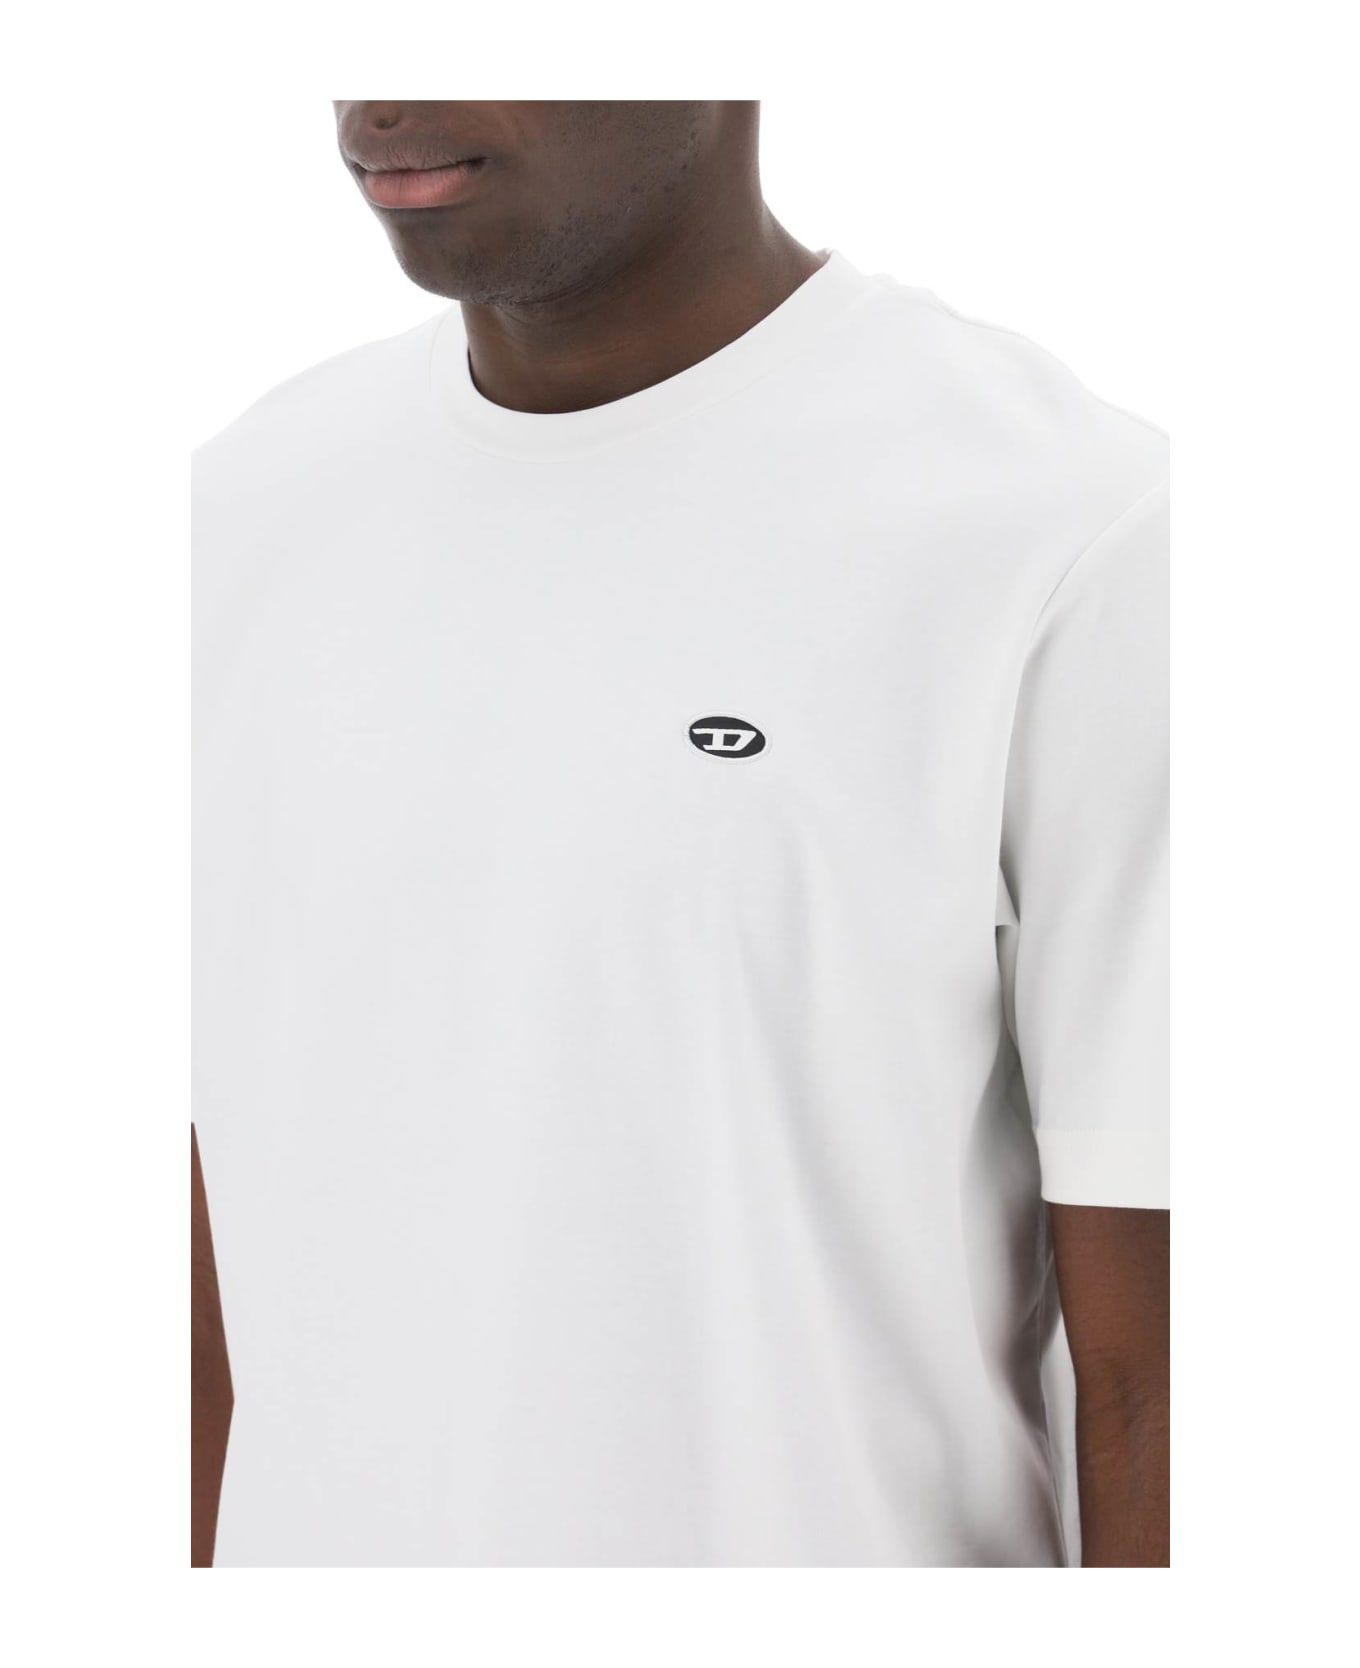 Diesel 't-just-doval-pj' T-shirt - Off/white